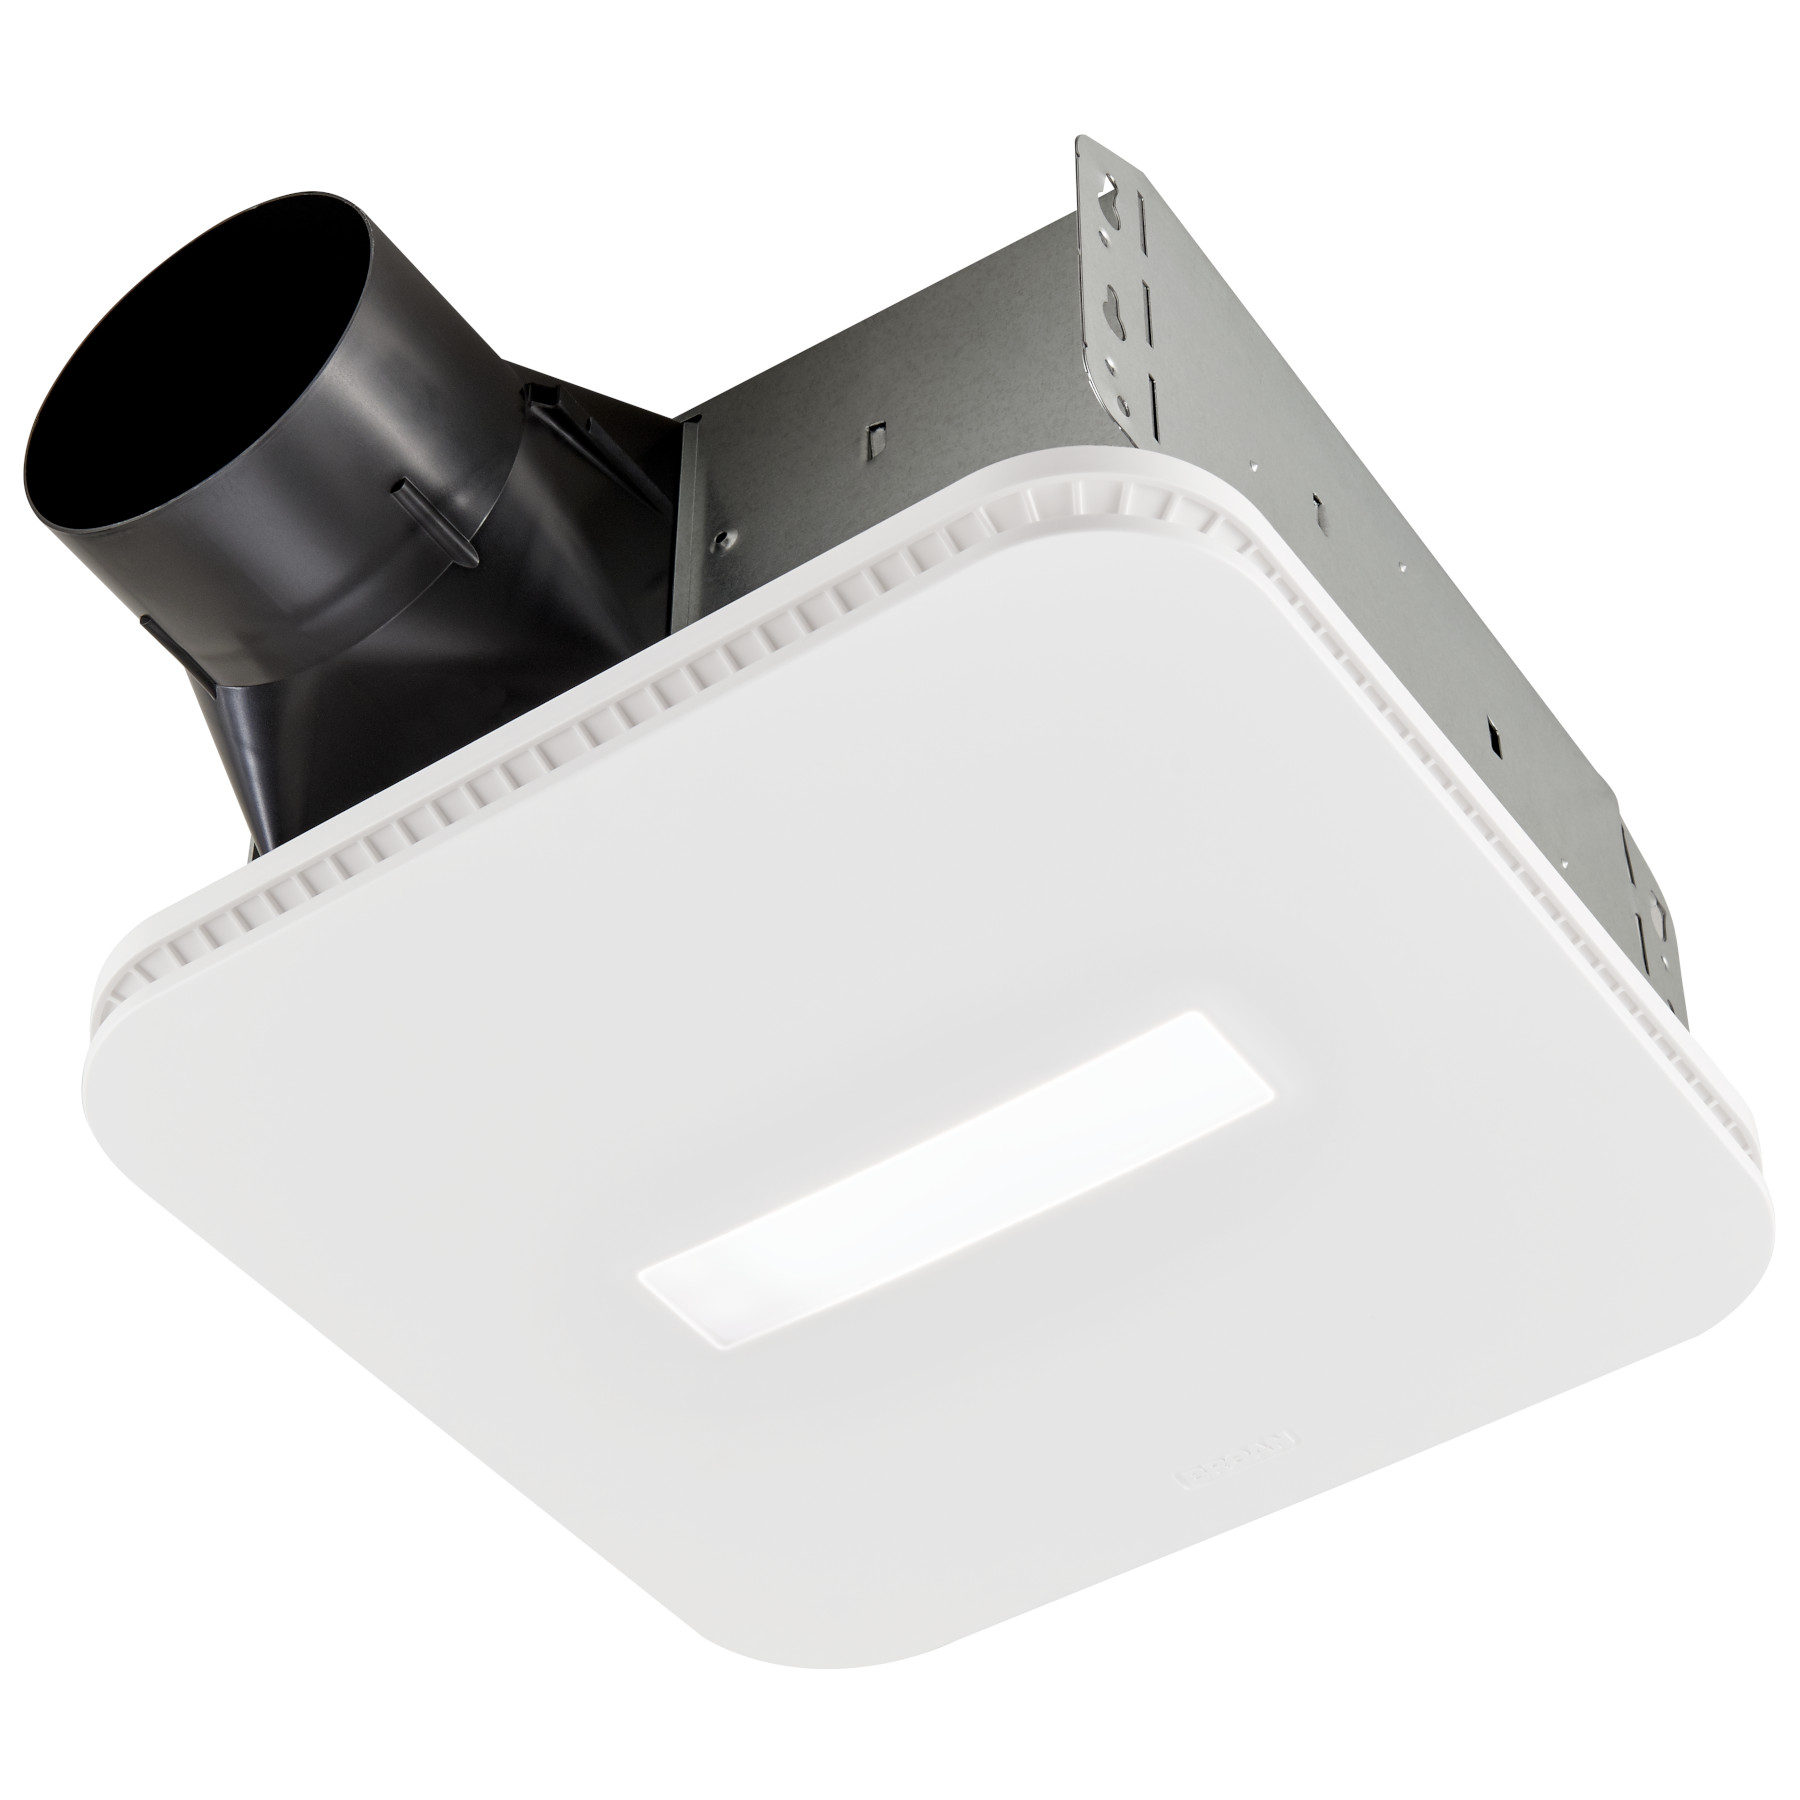  NuTone® Roomside Series 80 CFM 0.7 Sones Ventilation Fan Light with CleanCover™ ENERGY STAR®